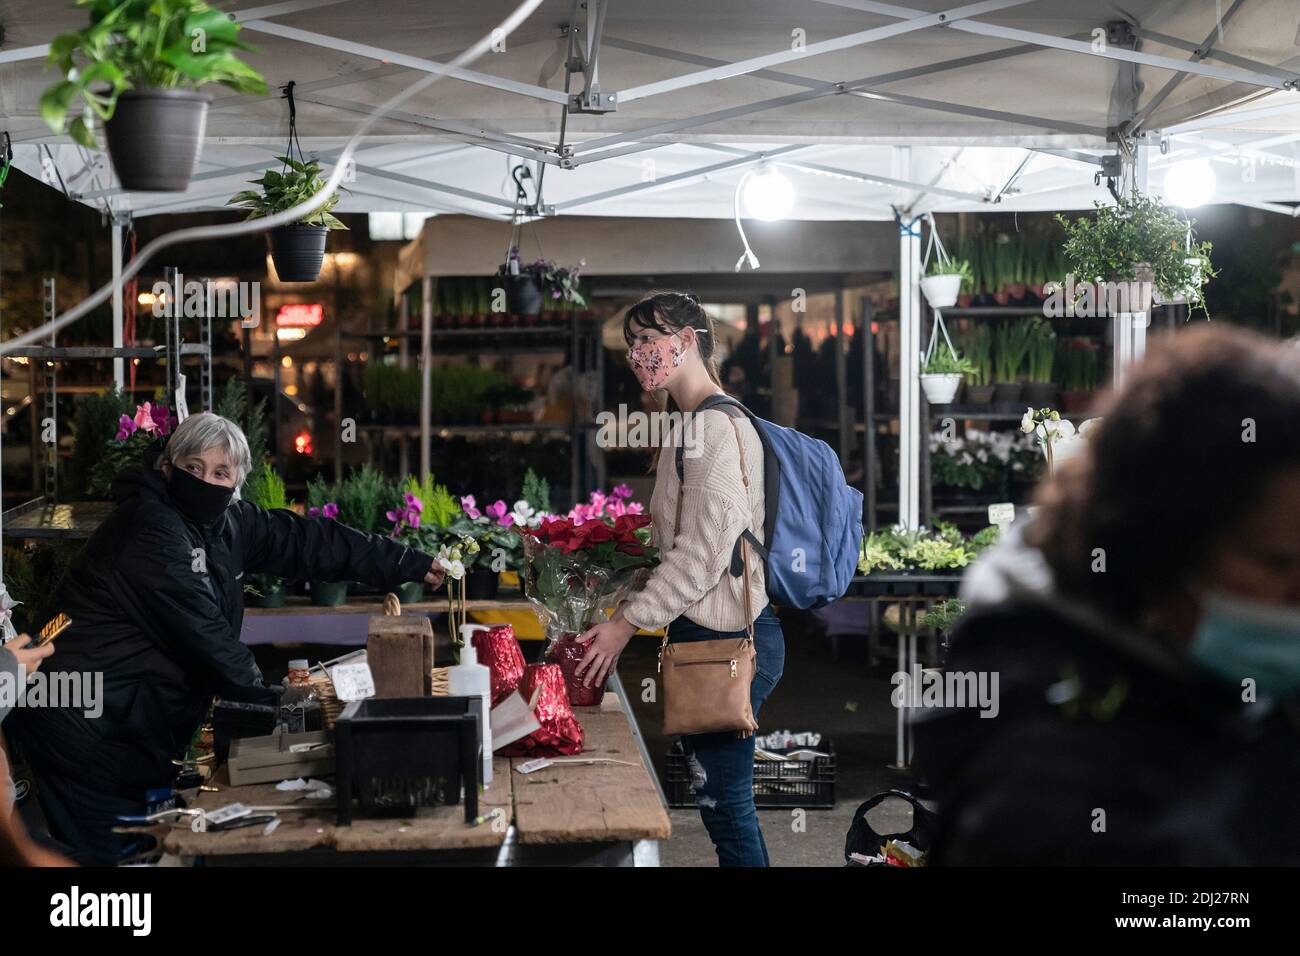 New York, United States. 12th Dec, 2020. A woman buys poinsettia during Holiday season at Union Square farmers market in New York on December 12, 2020. (Photo by Lev Radin/Sipa USA) Credit: Sipa USA/Alamy Live News Stock Photo